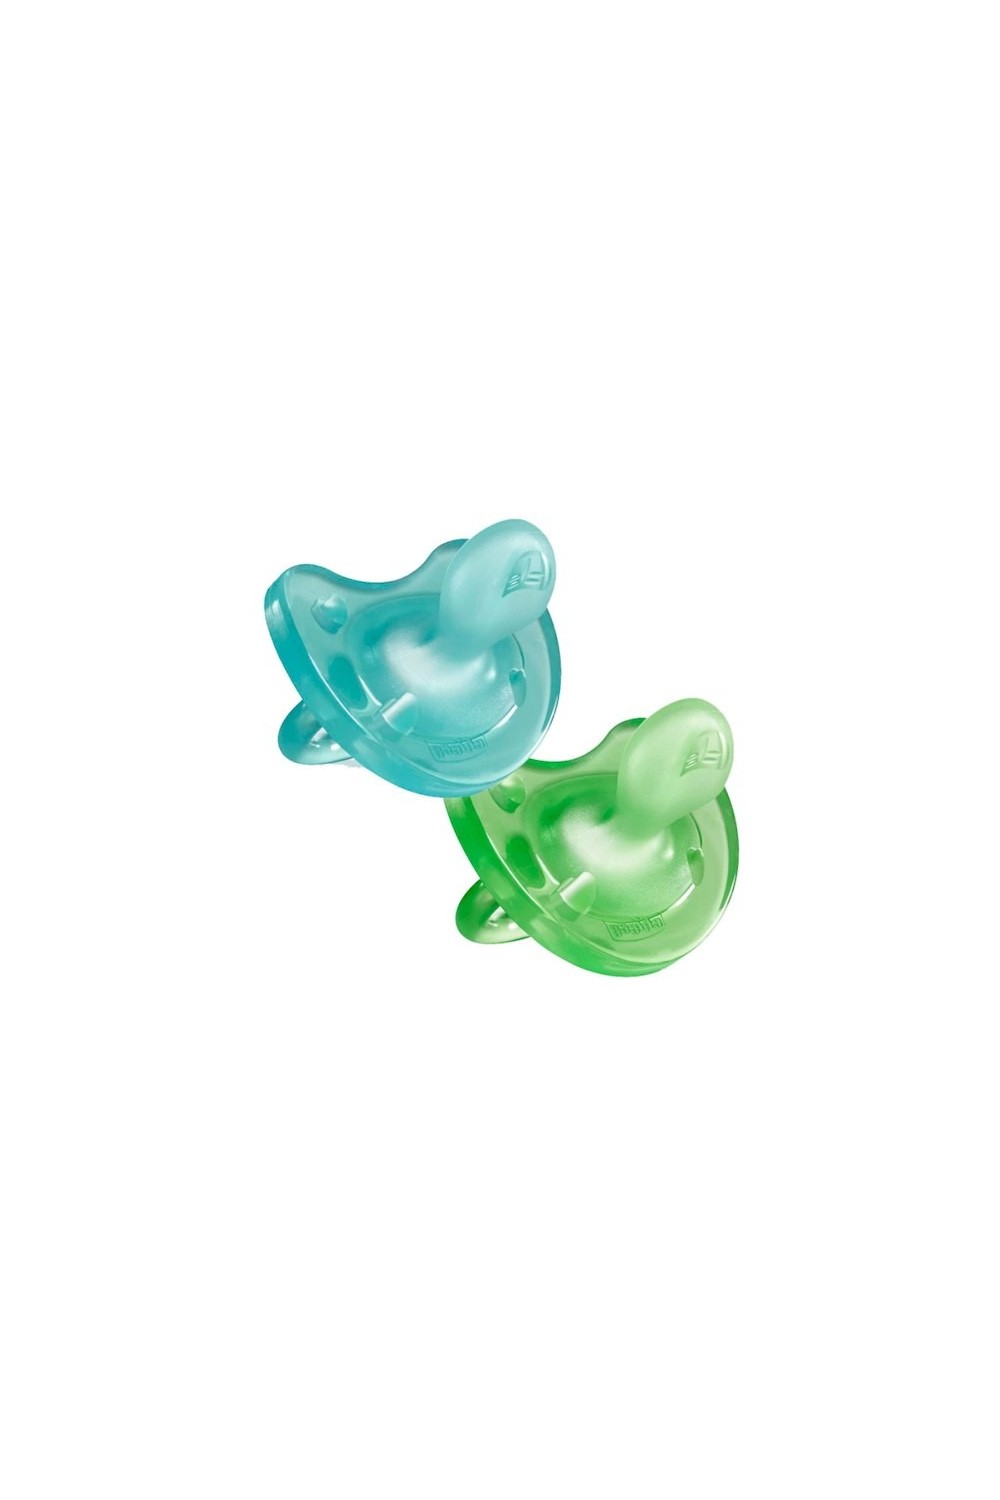 Chicco  Physio Soft Pacifier 12m+ 2 Units